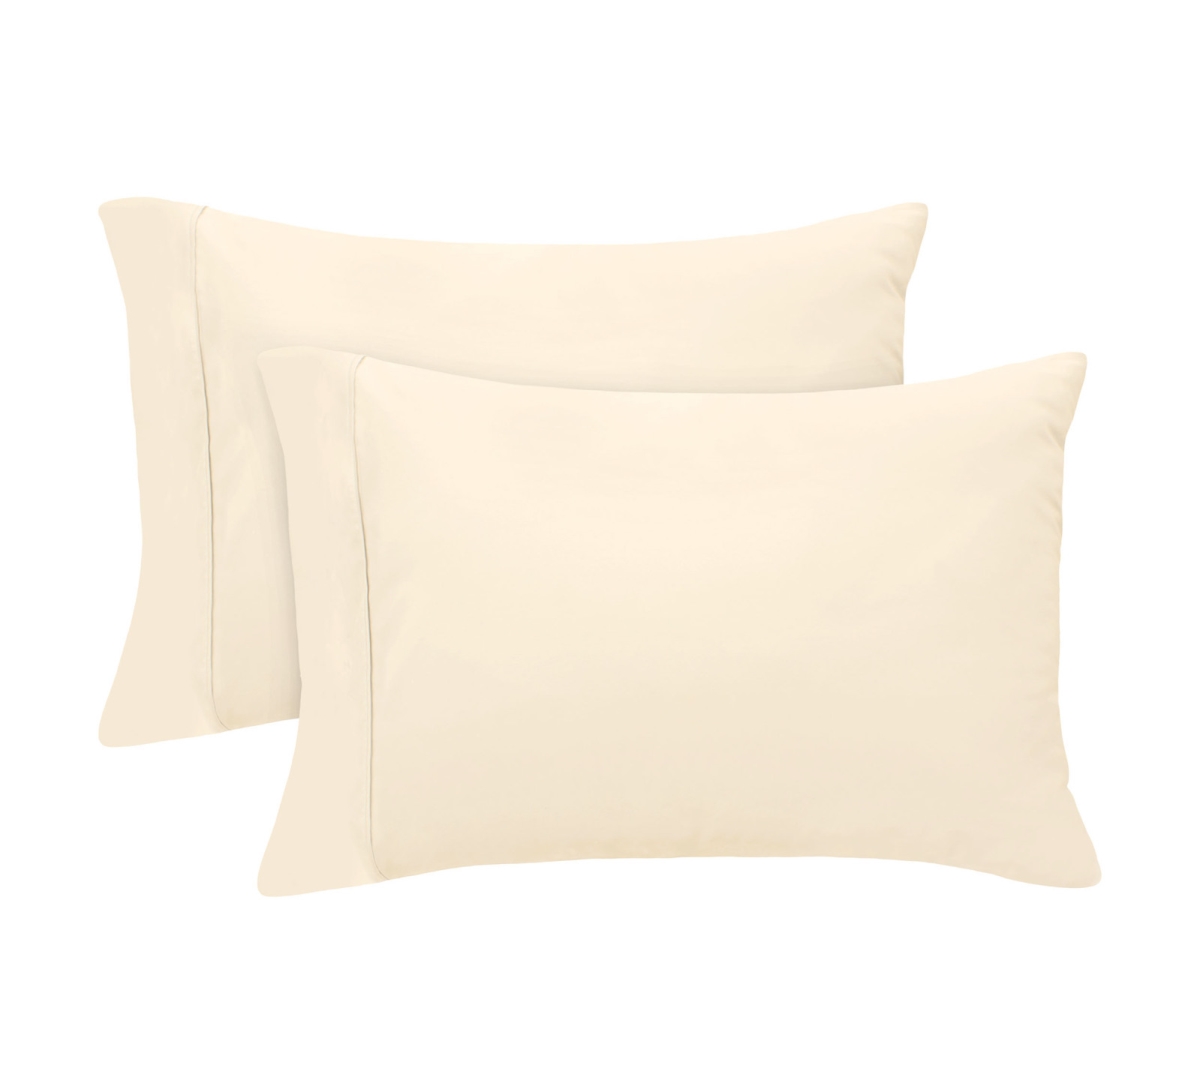 Yms008199 Luxury 620 Thread Count 100 Percent Cotton Pillowcase Set, Ivory - King - 2 Piece